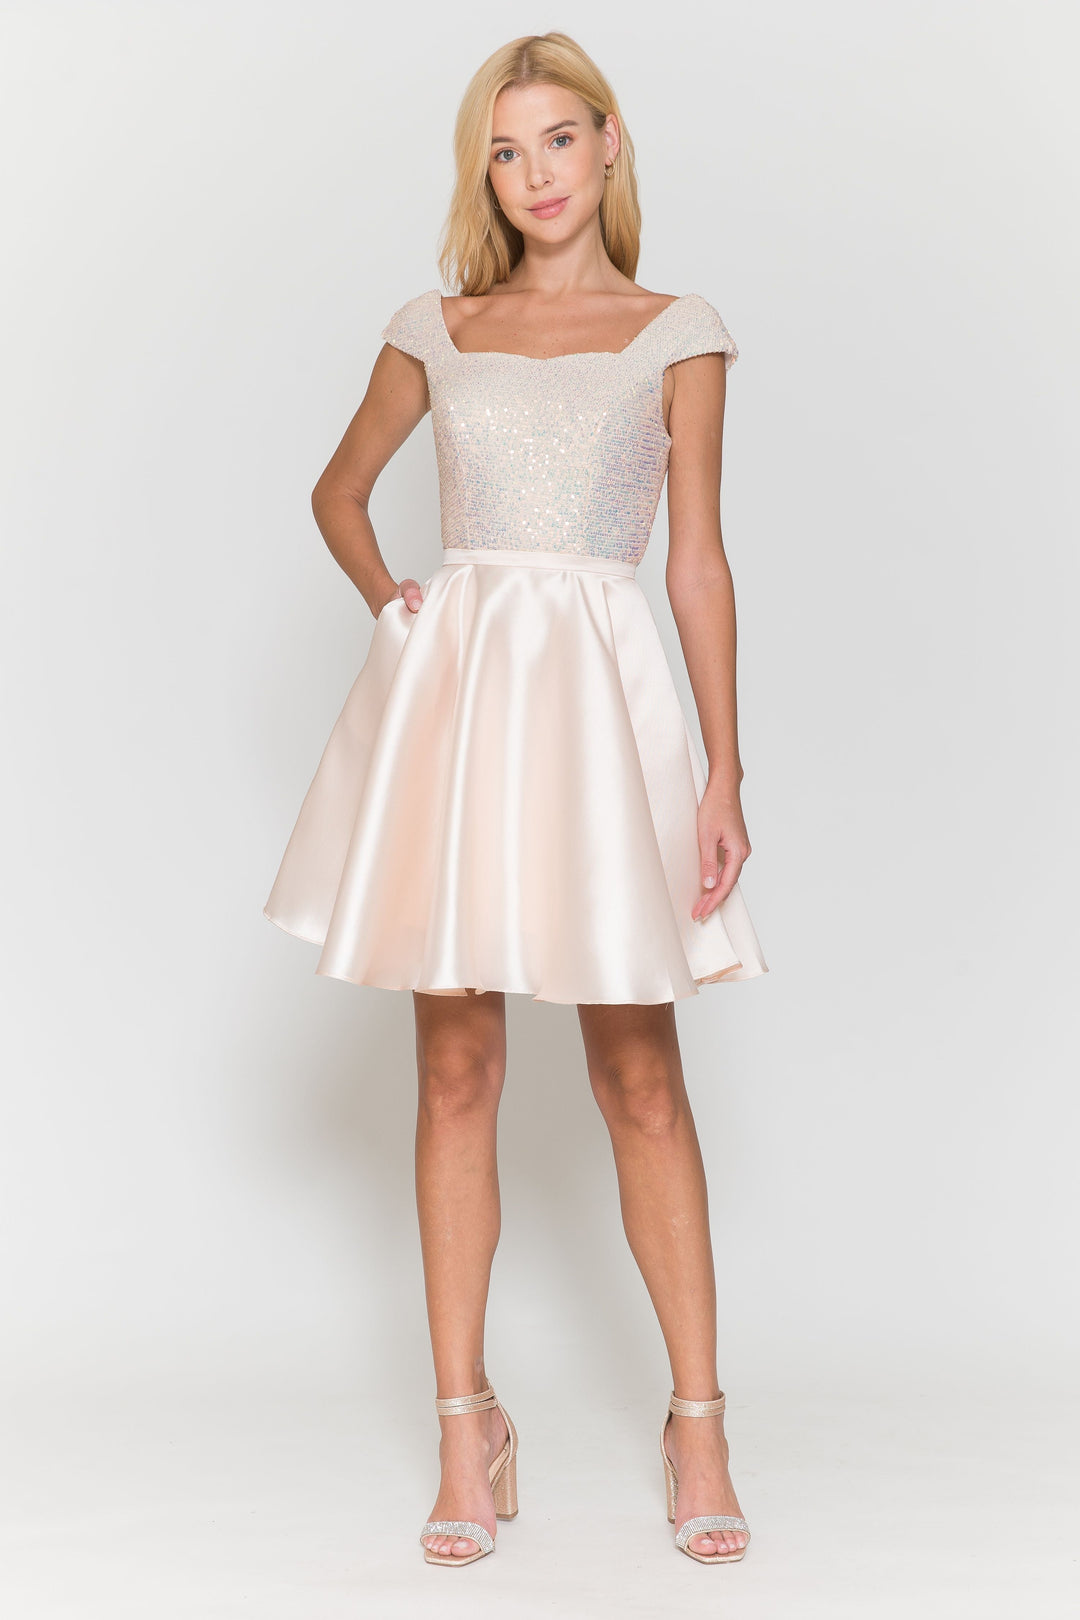 Short Sequin Bodice Cap Sleeve Dress by Poly USA 8732